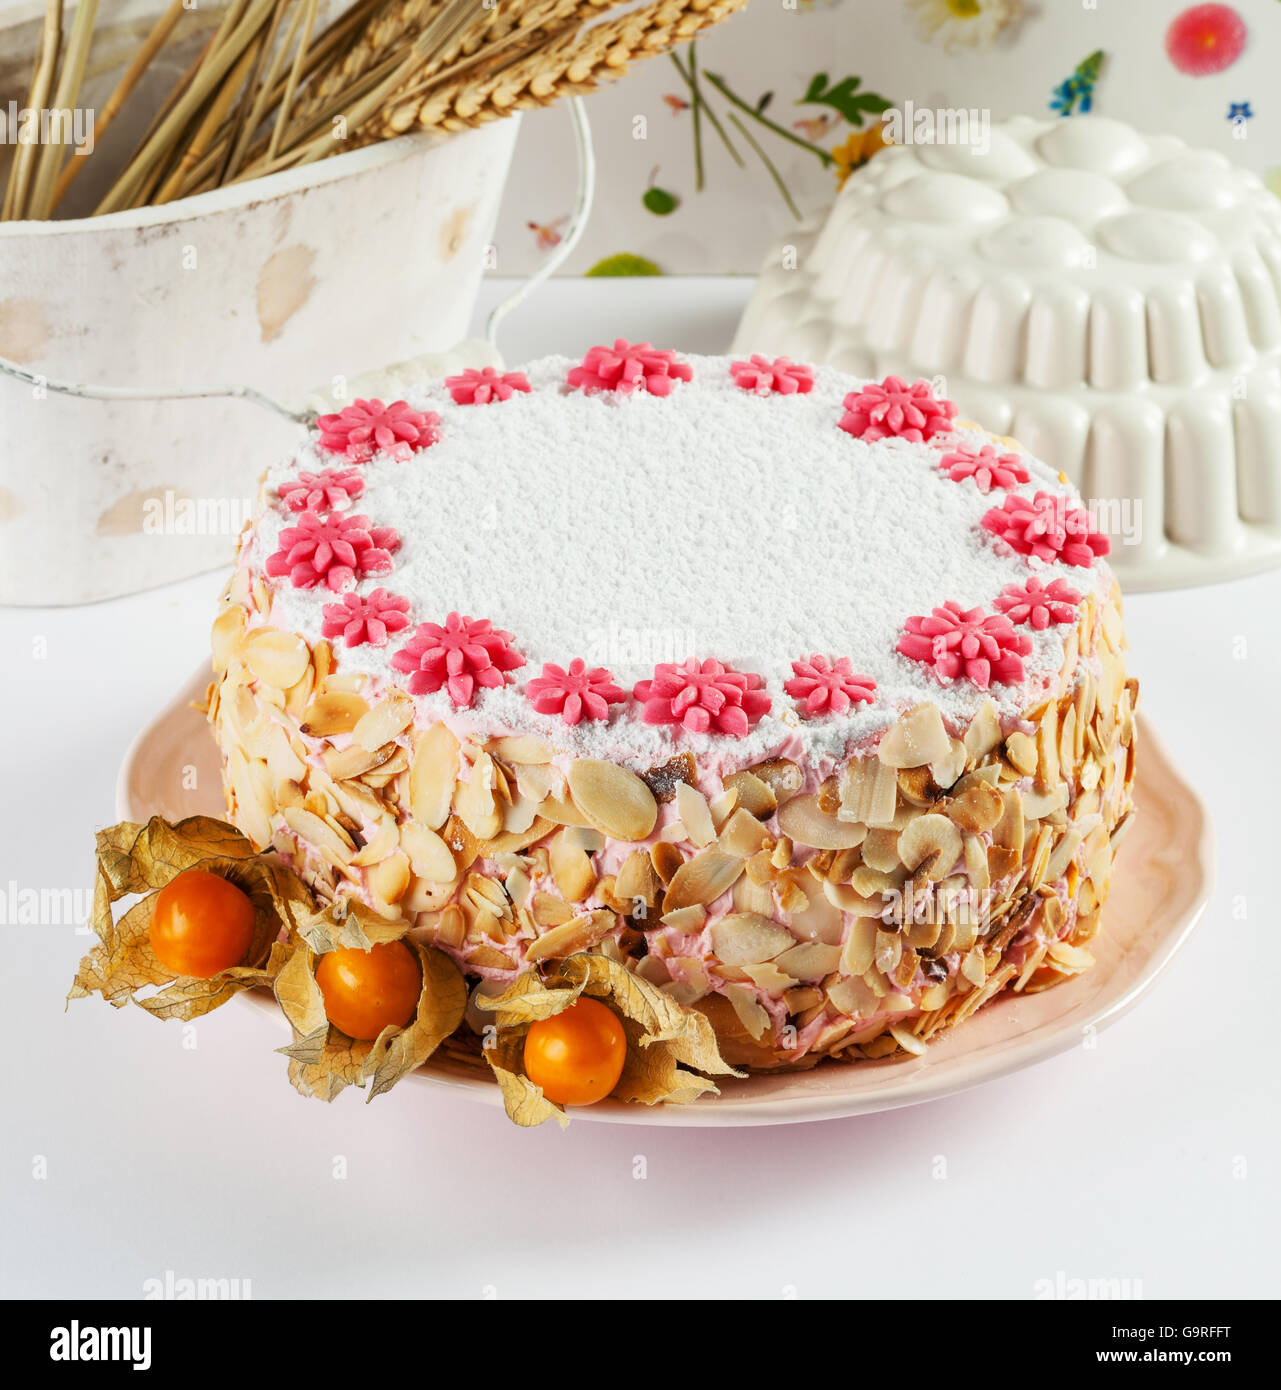 Zuger Kirschtorte is a layer cake from the city of Zug in Switzerland ...